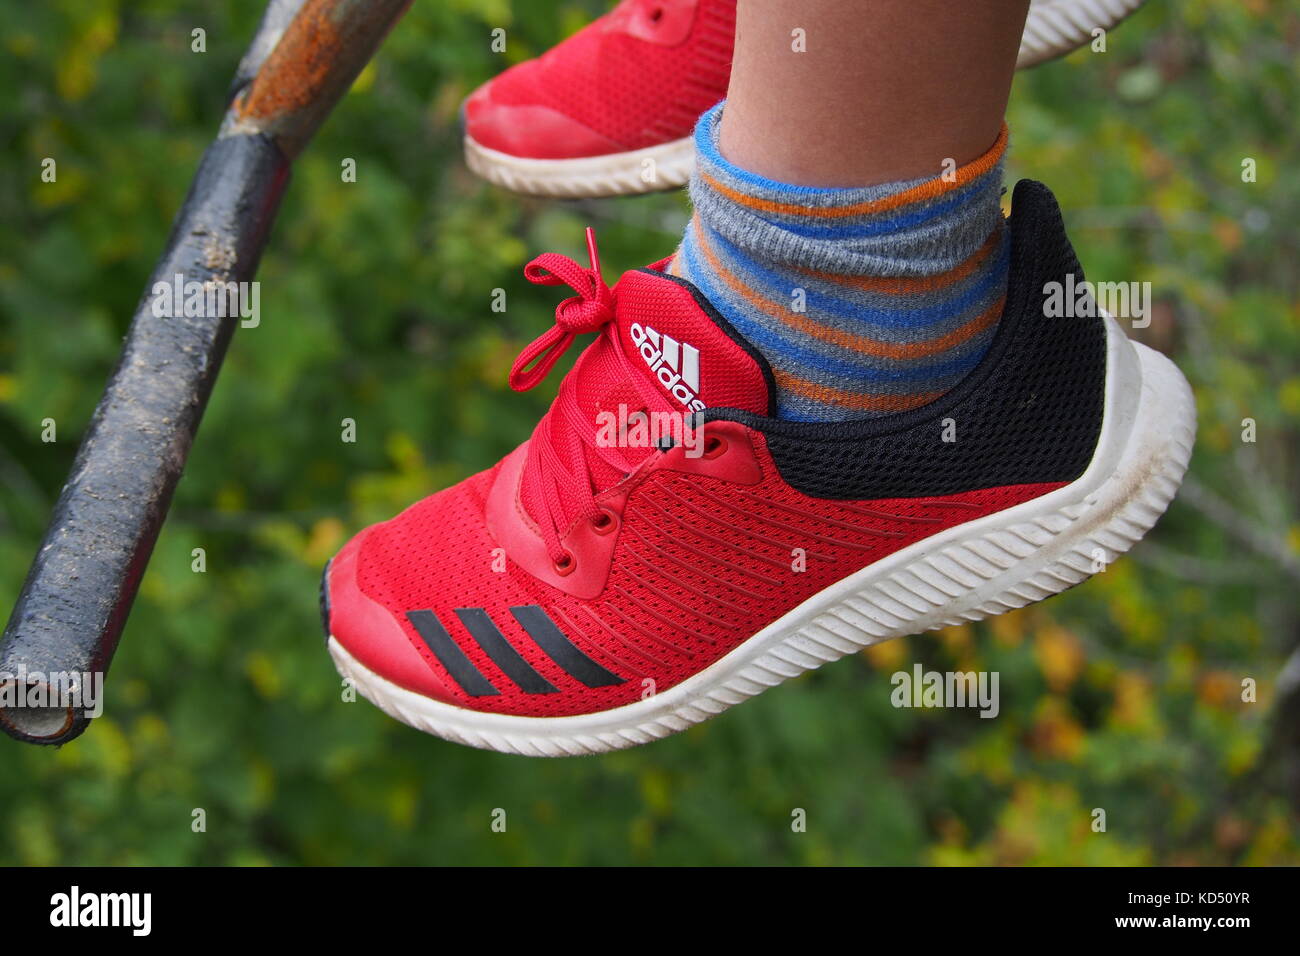 adidas young red